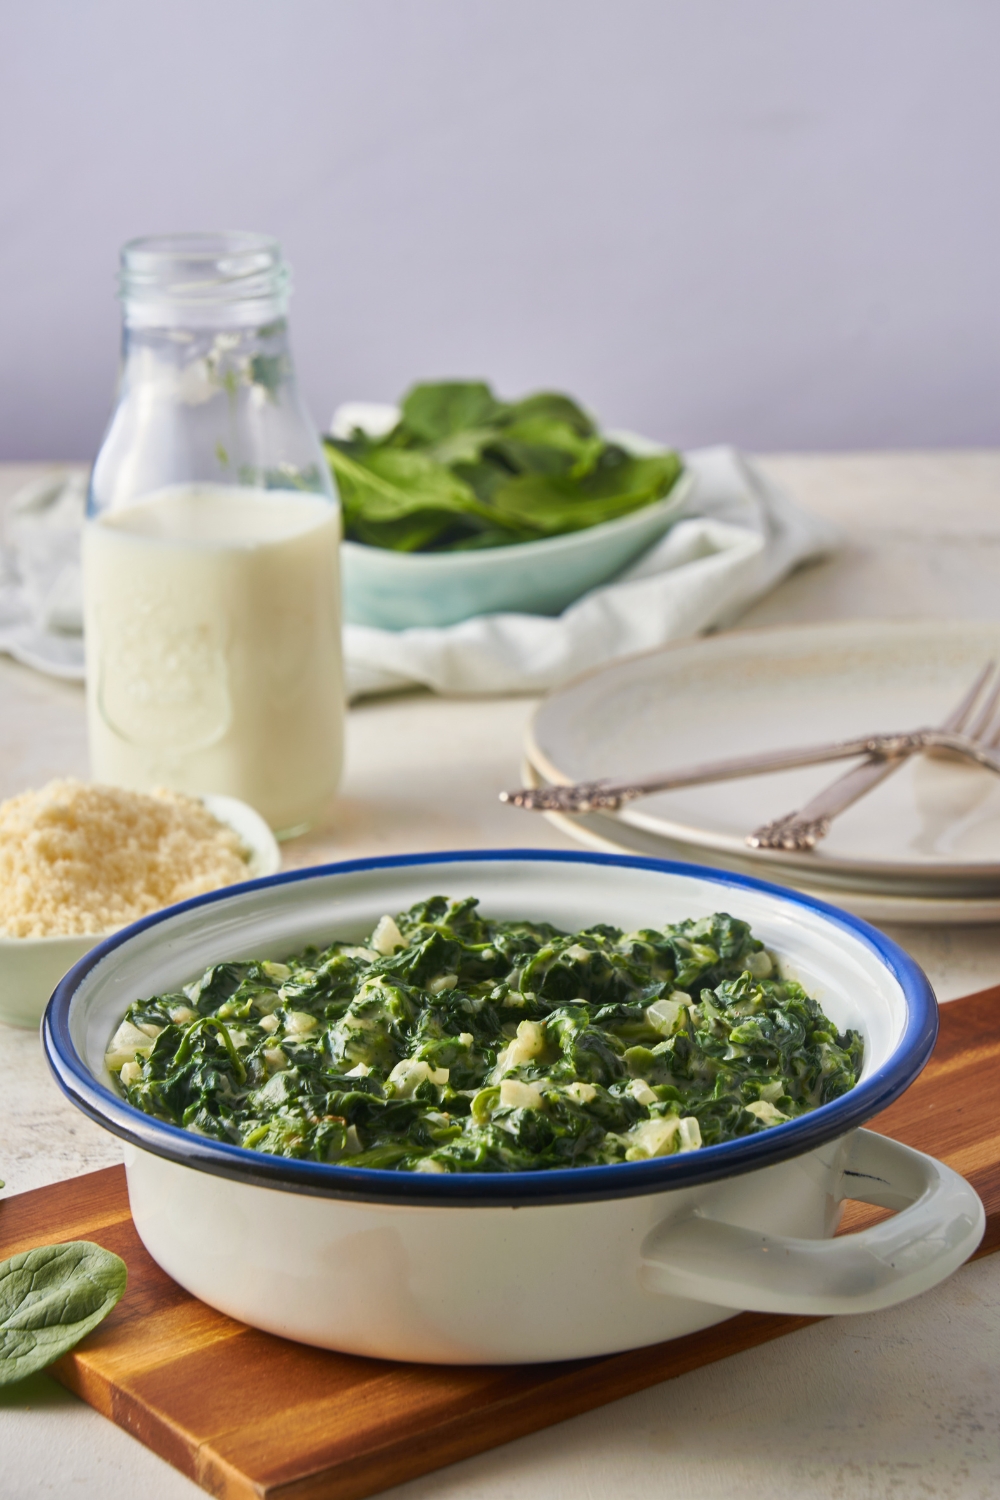 A white and blue rimmed serving dish filled with creamed spinach. The dish is atop a wooden board and there is a jar of milk in the background.